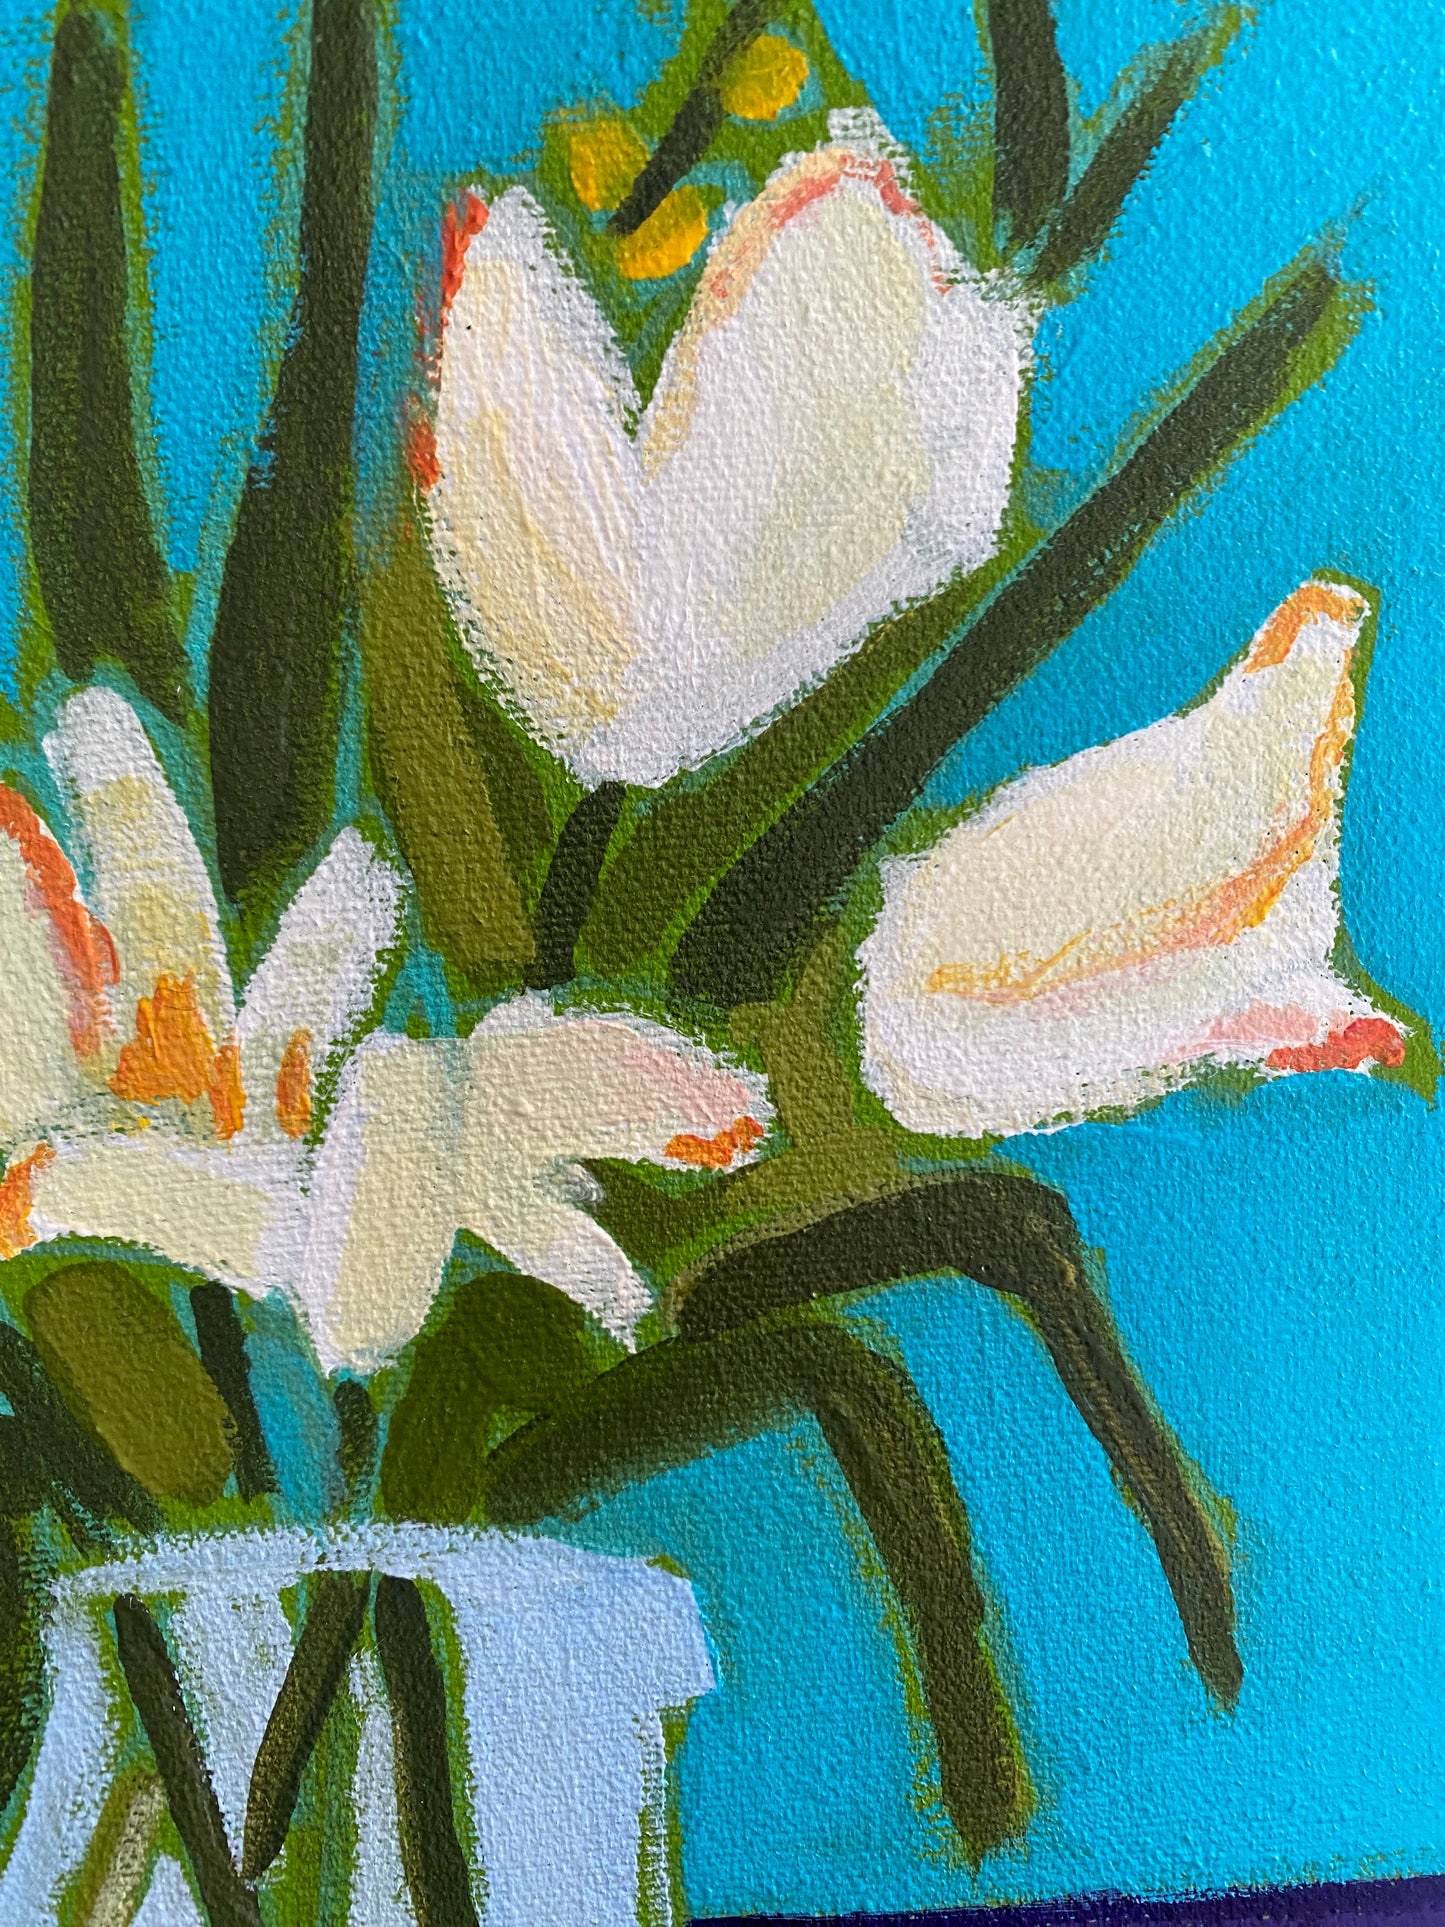 Original Wall Art / White Tulips on Purple and Teal / 10"x10" / Floral Painting on Canvas